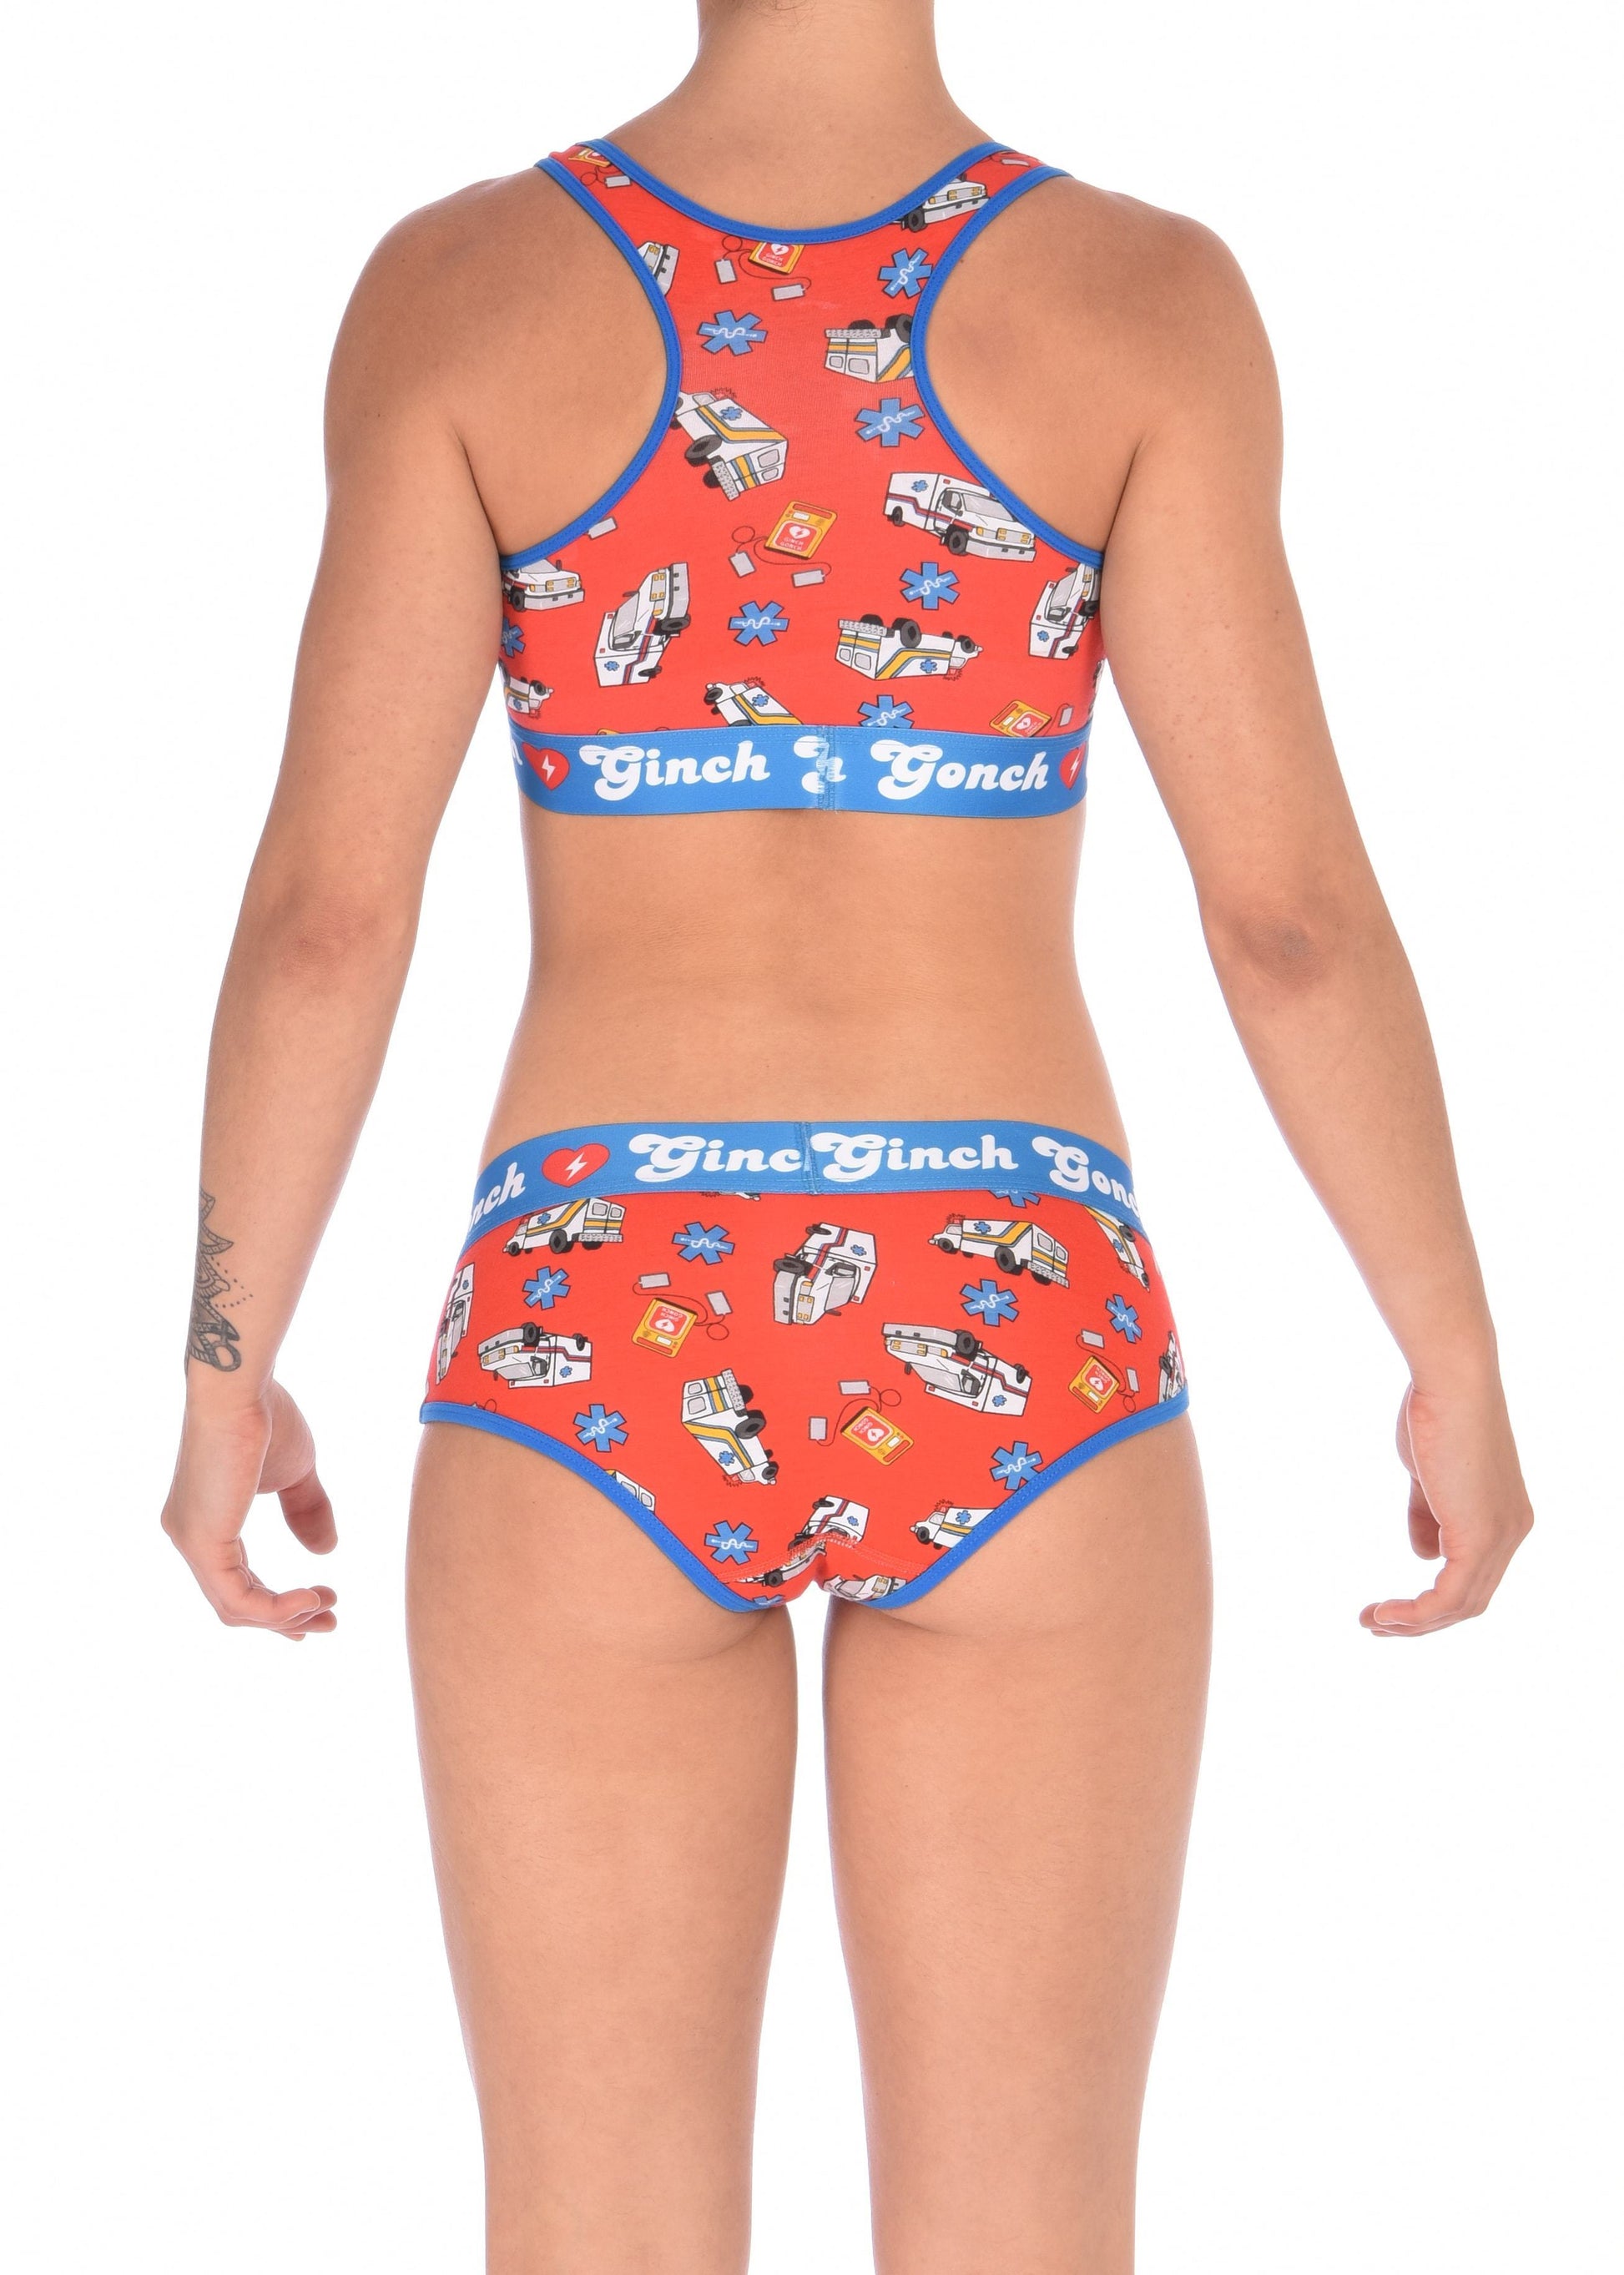 Ginch Gonch GG EMT boy cut Brief women's ambulance print with medical symbol and equipment on red background with blue trim and printed waistband back shown with matching sports bra